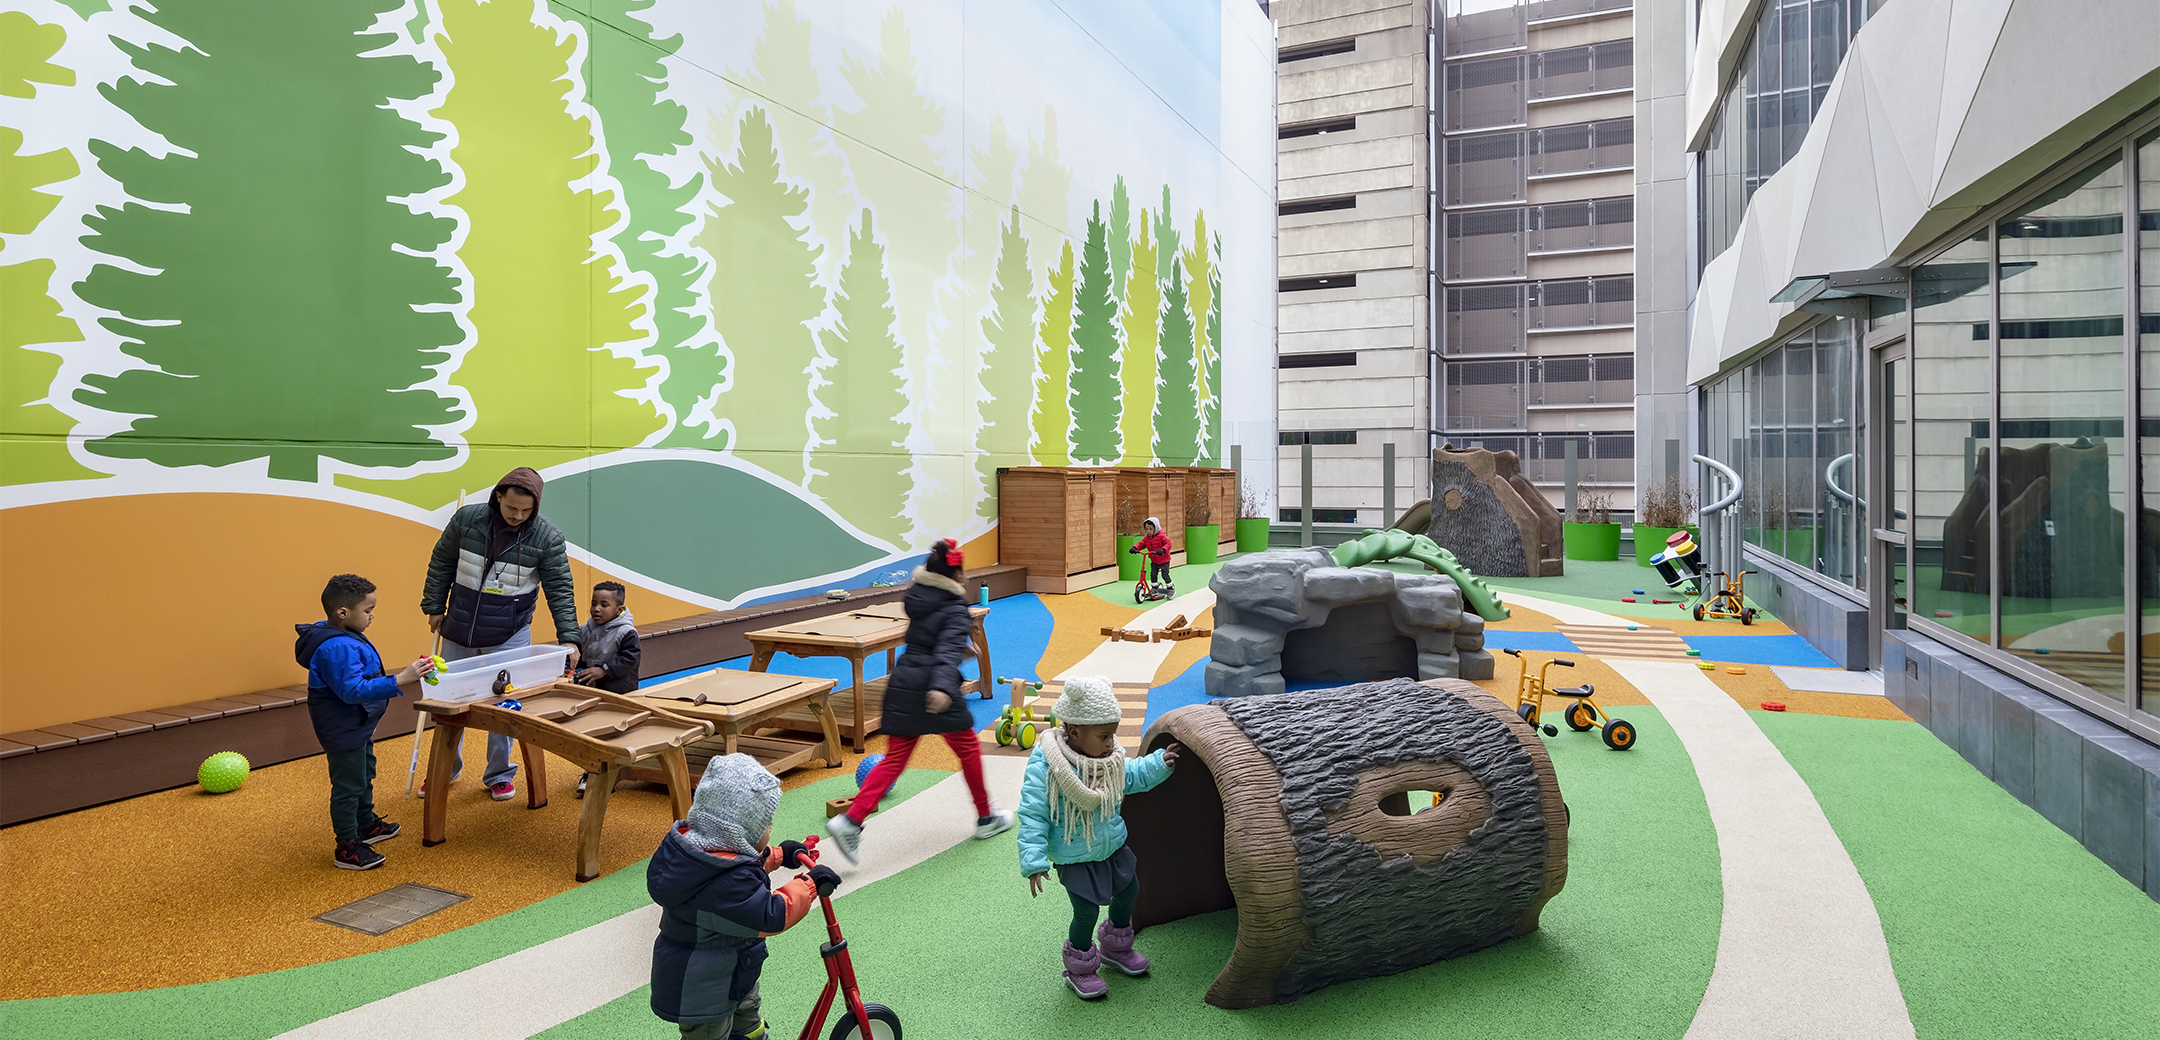 An image of the exterior children's playground with multiple children playing on the playground equipment shaped like trees and rocks.